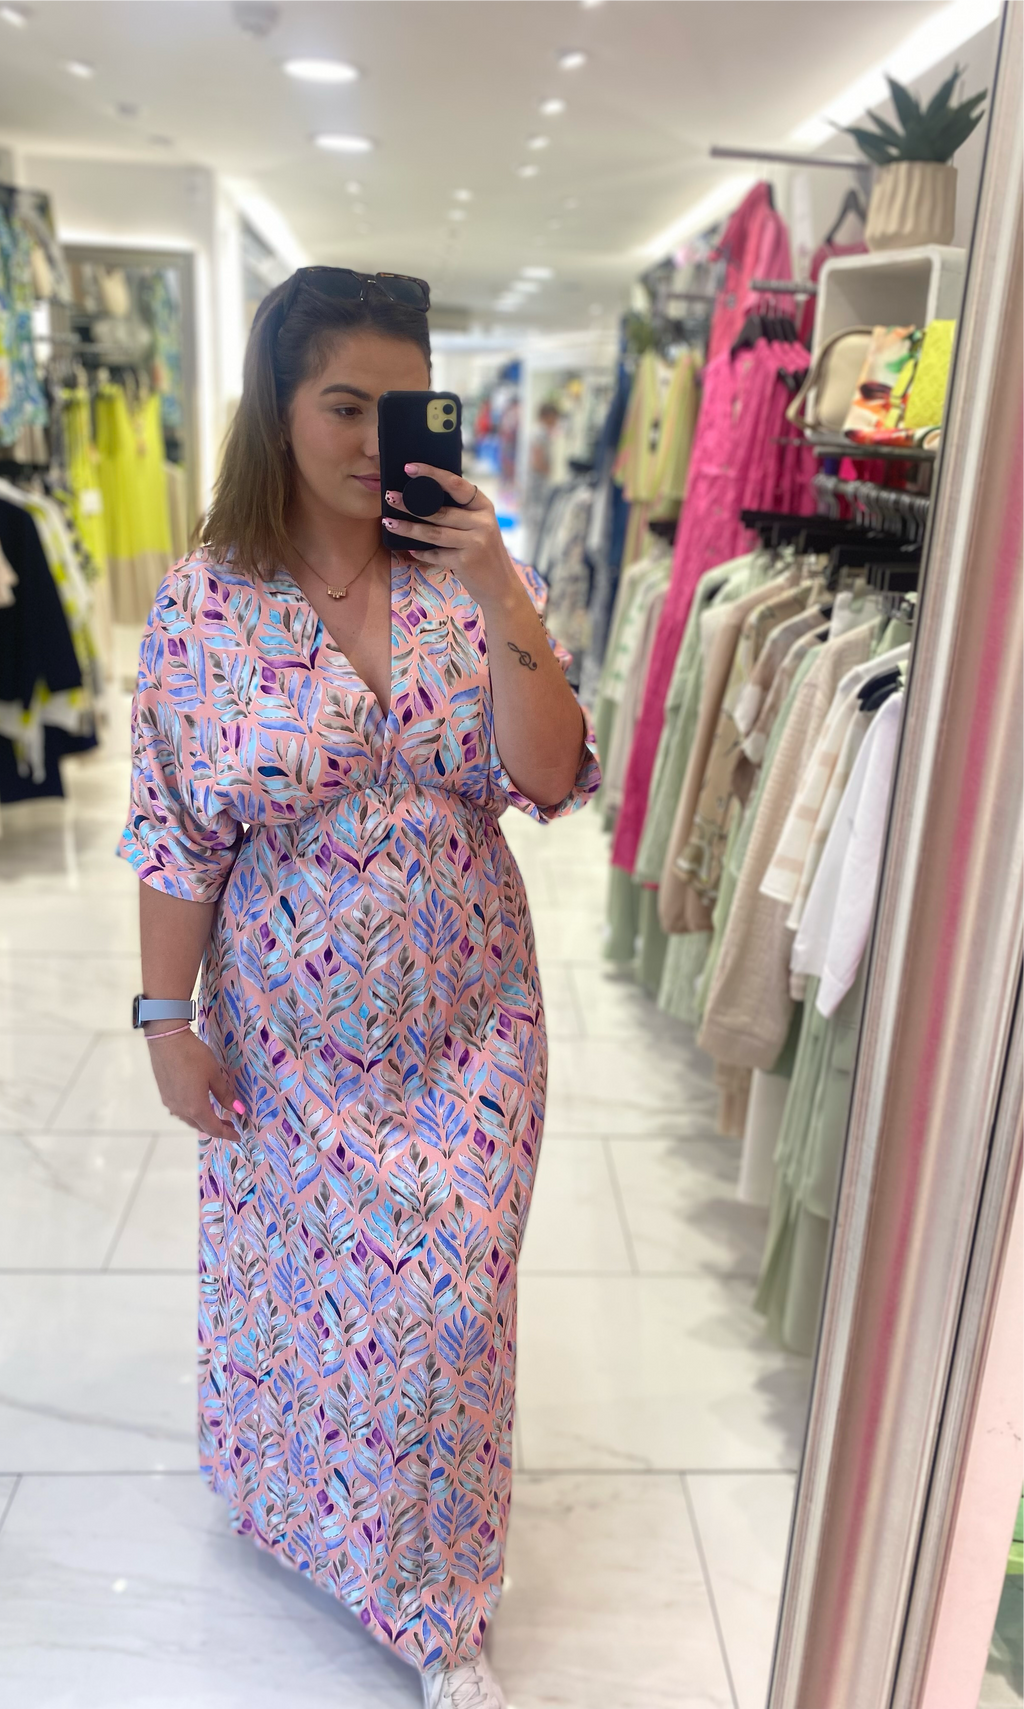 Deck leaf printed maxi dress with v-neck, empire waistline and bat-wing style top in peachy pink with blue and purple print (front) 